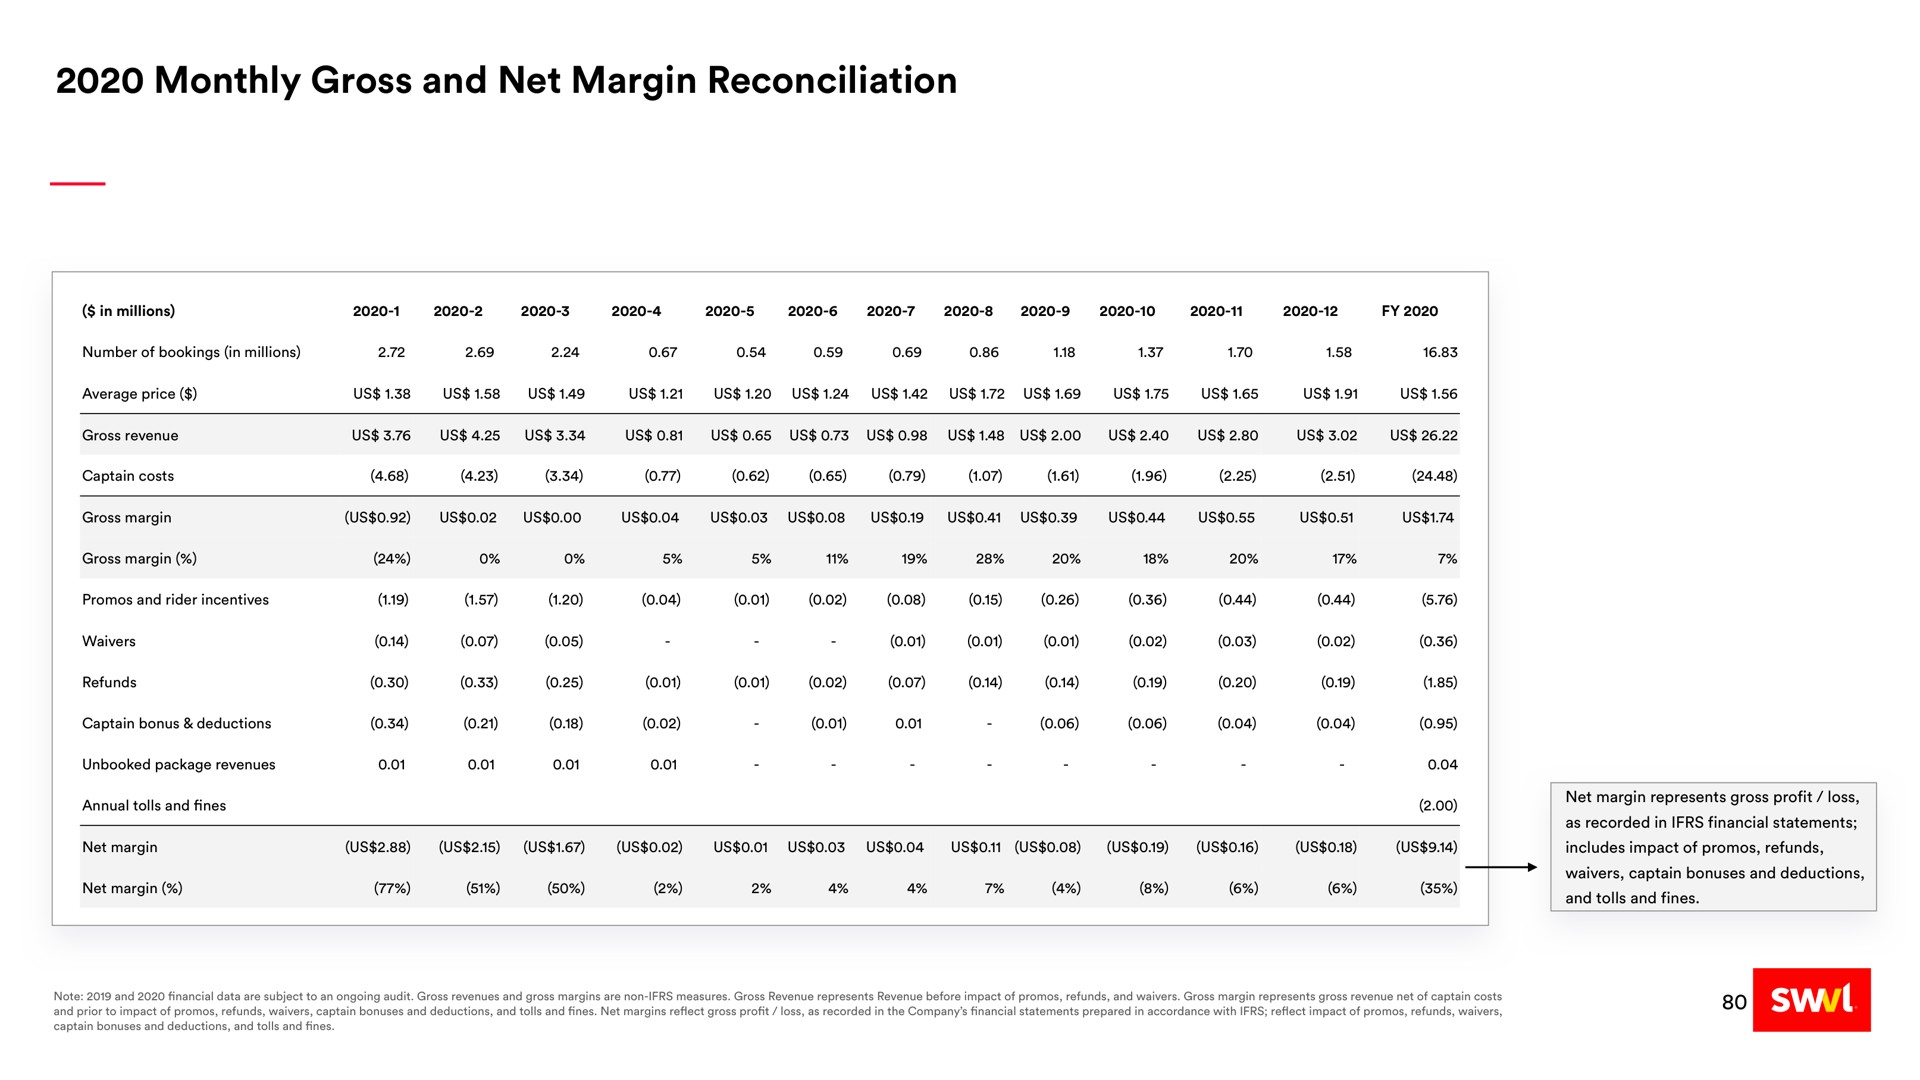 monthly gross and net margin reconciliation | Swvl